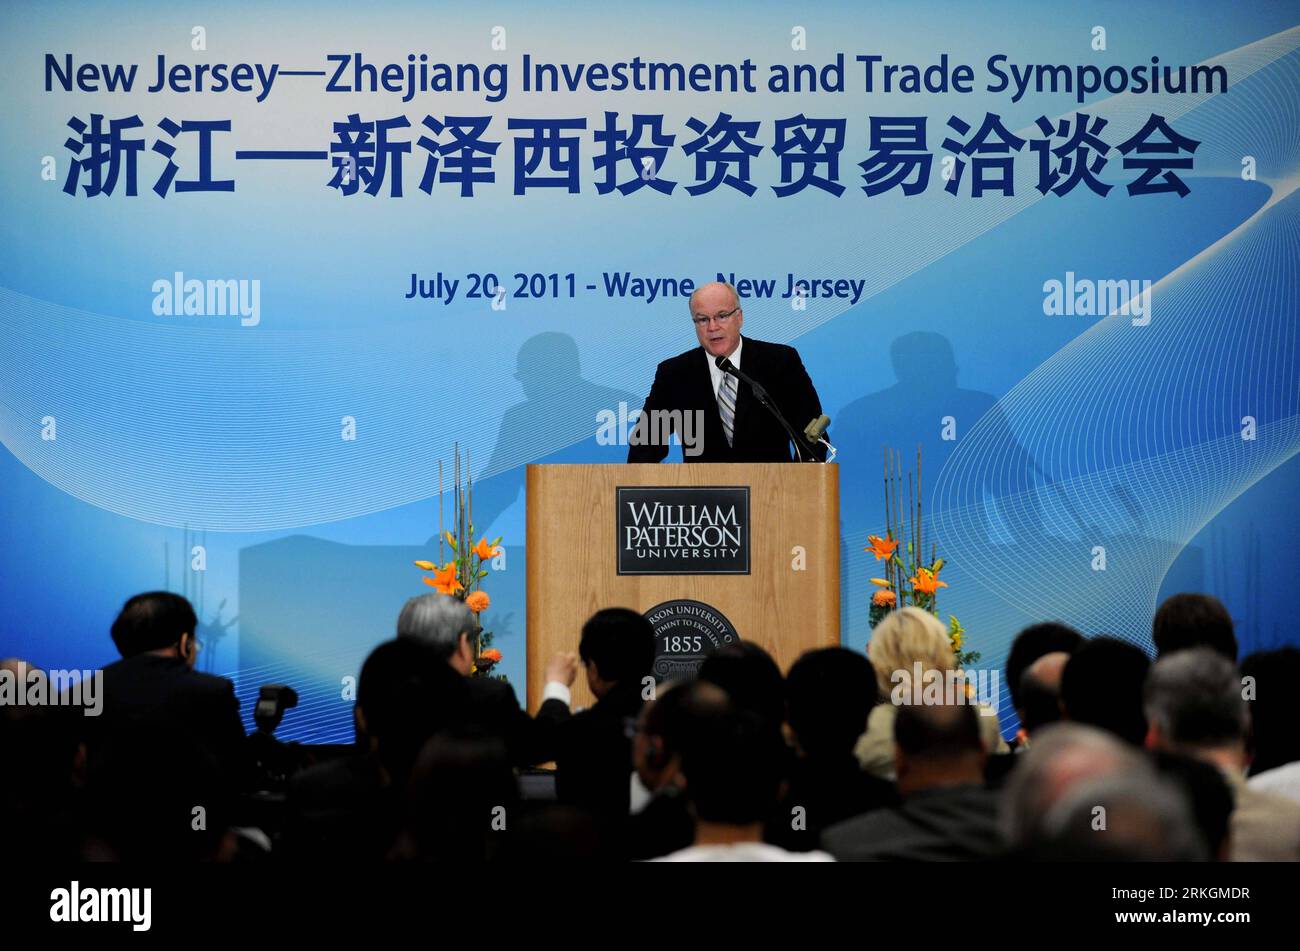 Bildnummer: 55606342  Datum: 20.07.2011  Copyright: imago/Xinhua (110721) -- NEW JERSEY, July 21, 2011 (Xinhua) -- Kevin Rigby, vice president of Novartis Pharmaceuticals Corporation, speaks at the New Jersey-Zhejiang Investment and Trade Symposium held at William Paterson University in New Jersey, the United States, July 20, 2011. More than 100 Chinese and 200 American entrepreneurs participated in the symposium on Wednesday. (Xinhua/Shen Hong)(axy) U.S.-NEW JERSEY-ZHEJIANG-INVESTMENT AND TRADE SYMPOSIUM PUBLICATIONxNOTxINxCHN People Wirtschaft x0x xtm 2011 quer     Bildnummer 55606342 Date 2 Stock Photo